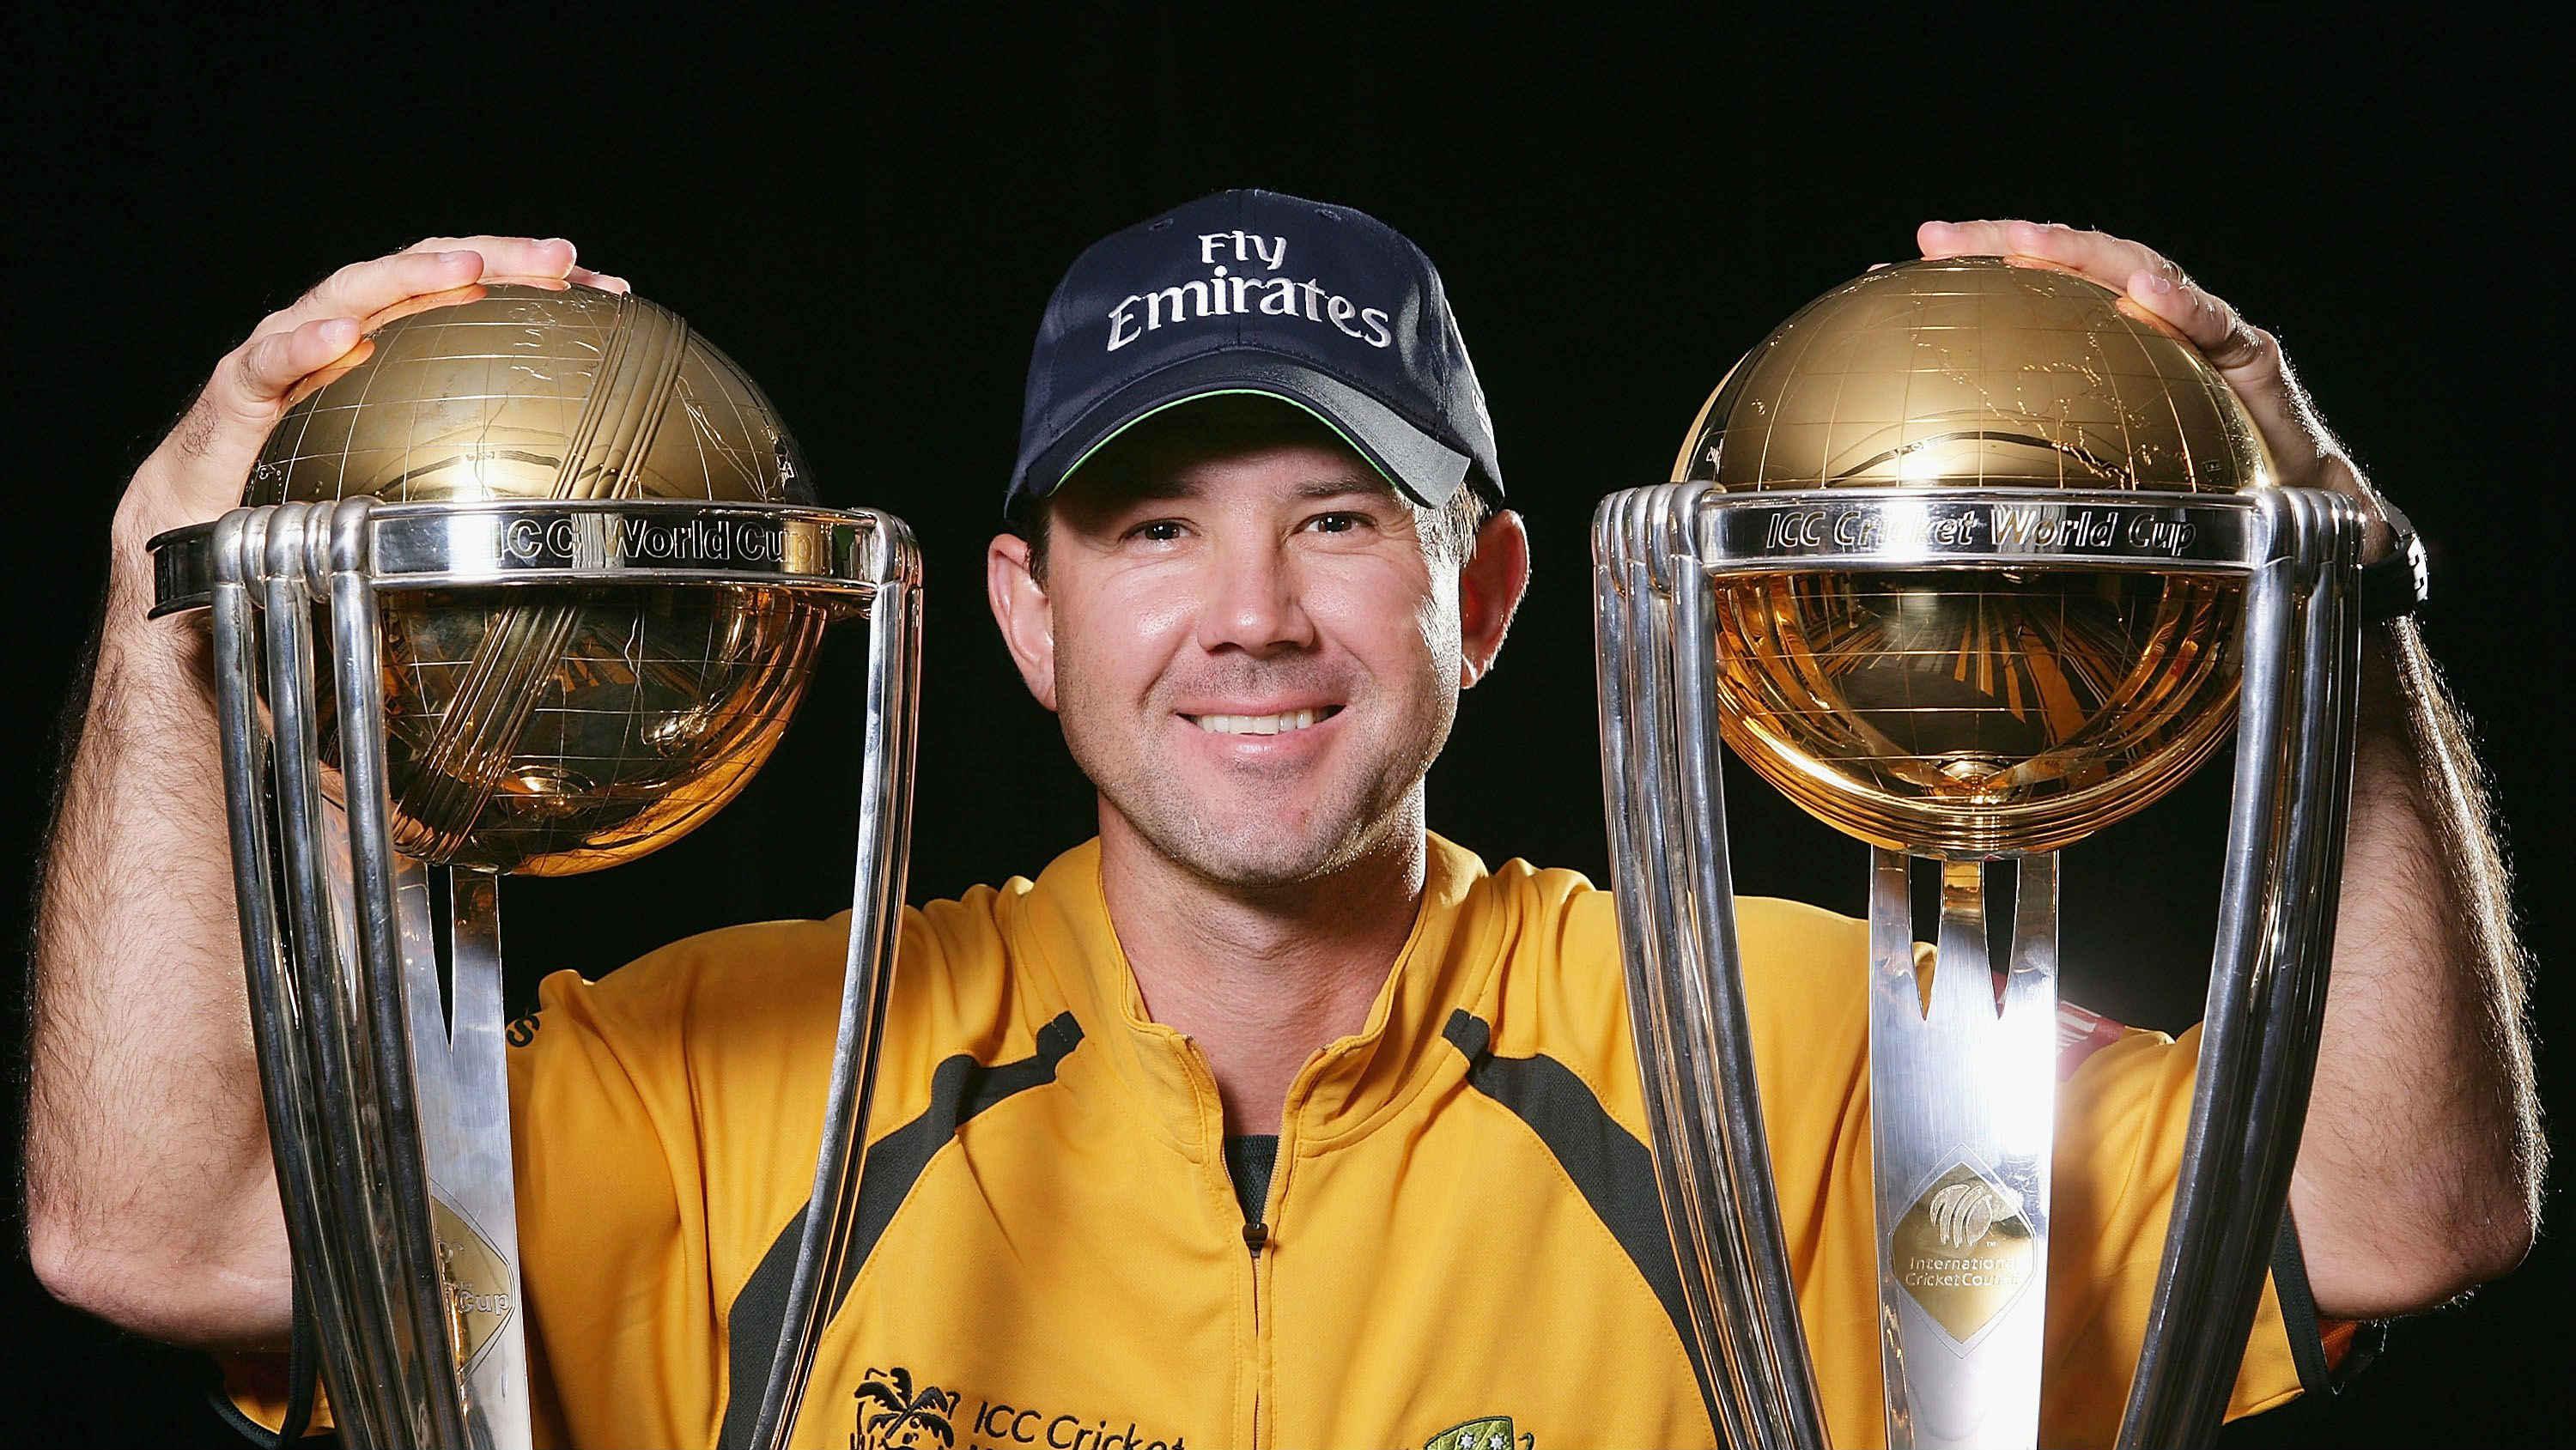 Ricky Ponting says "We need to start putting the handbrakes on a few players" ahead of plans for Indian Premier League: IPL 2021